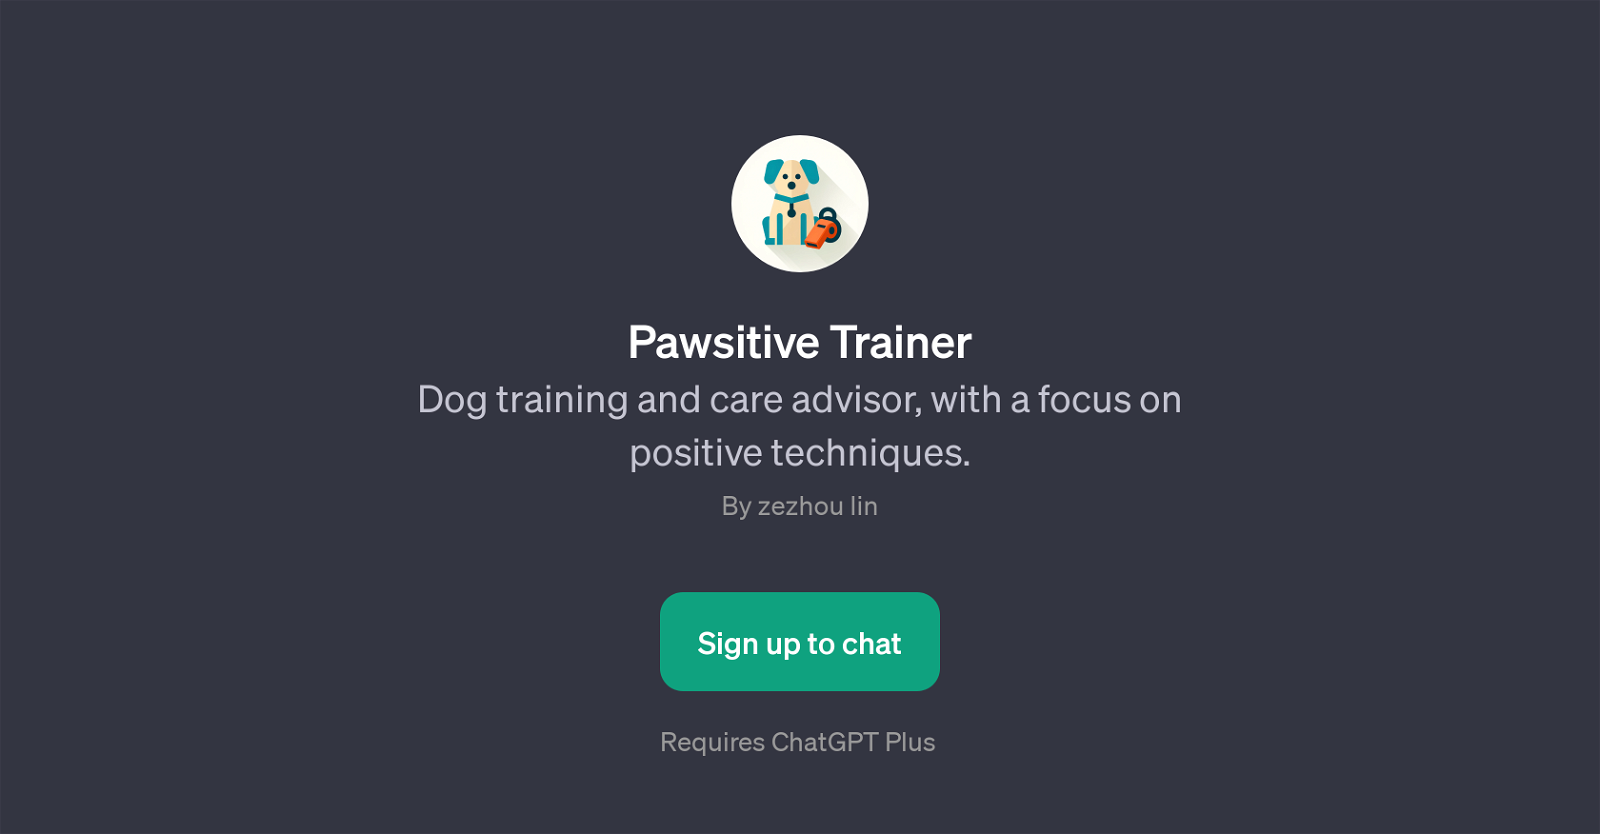 Pawsitive Trainer website